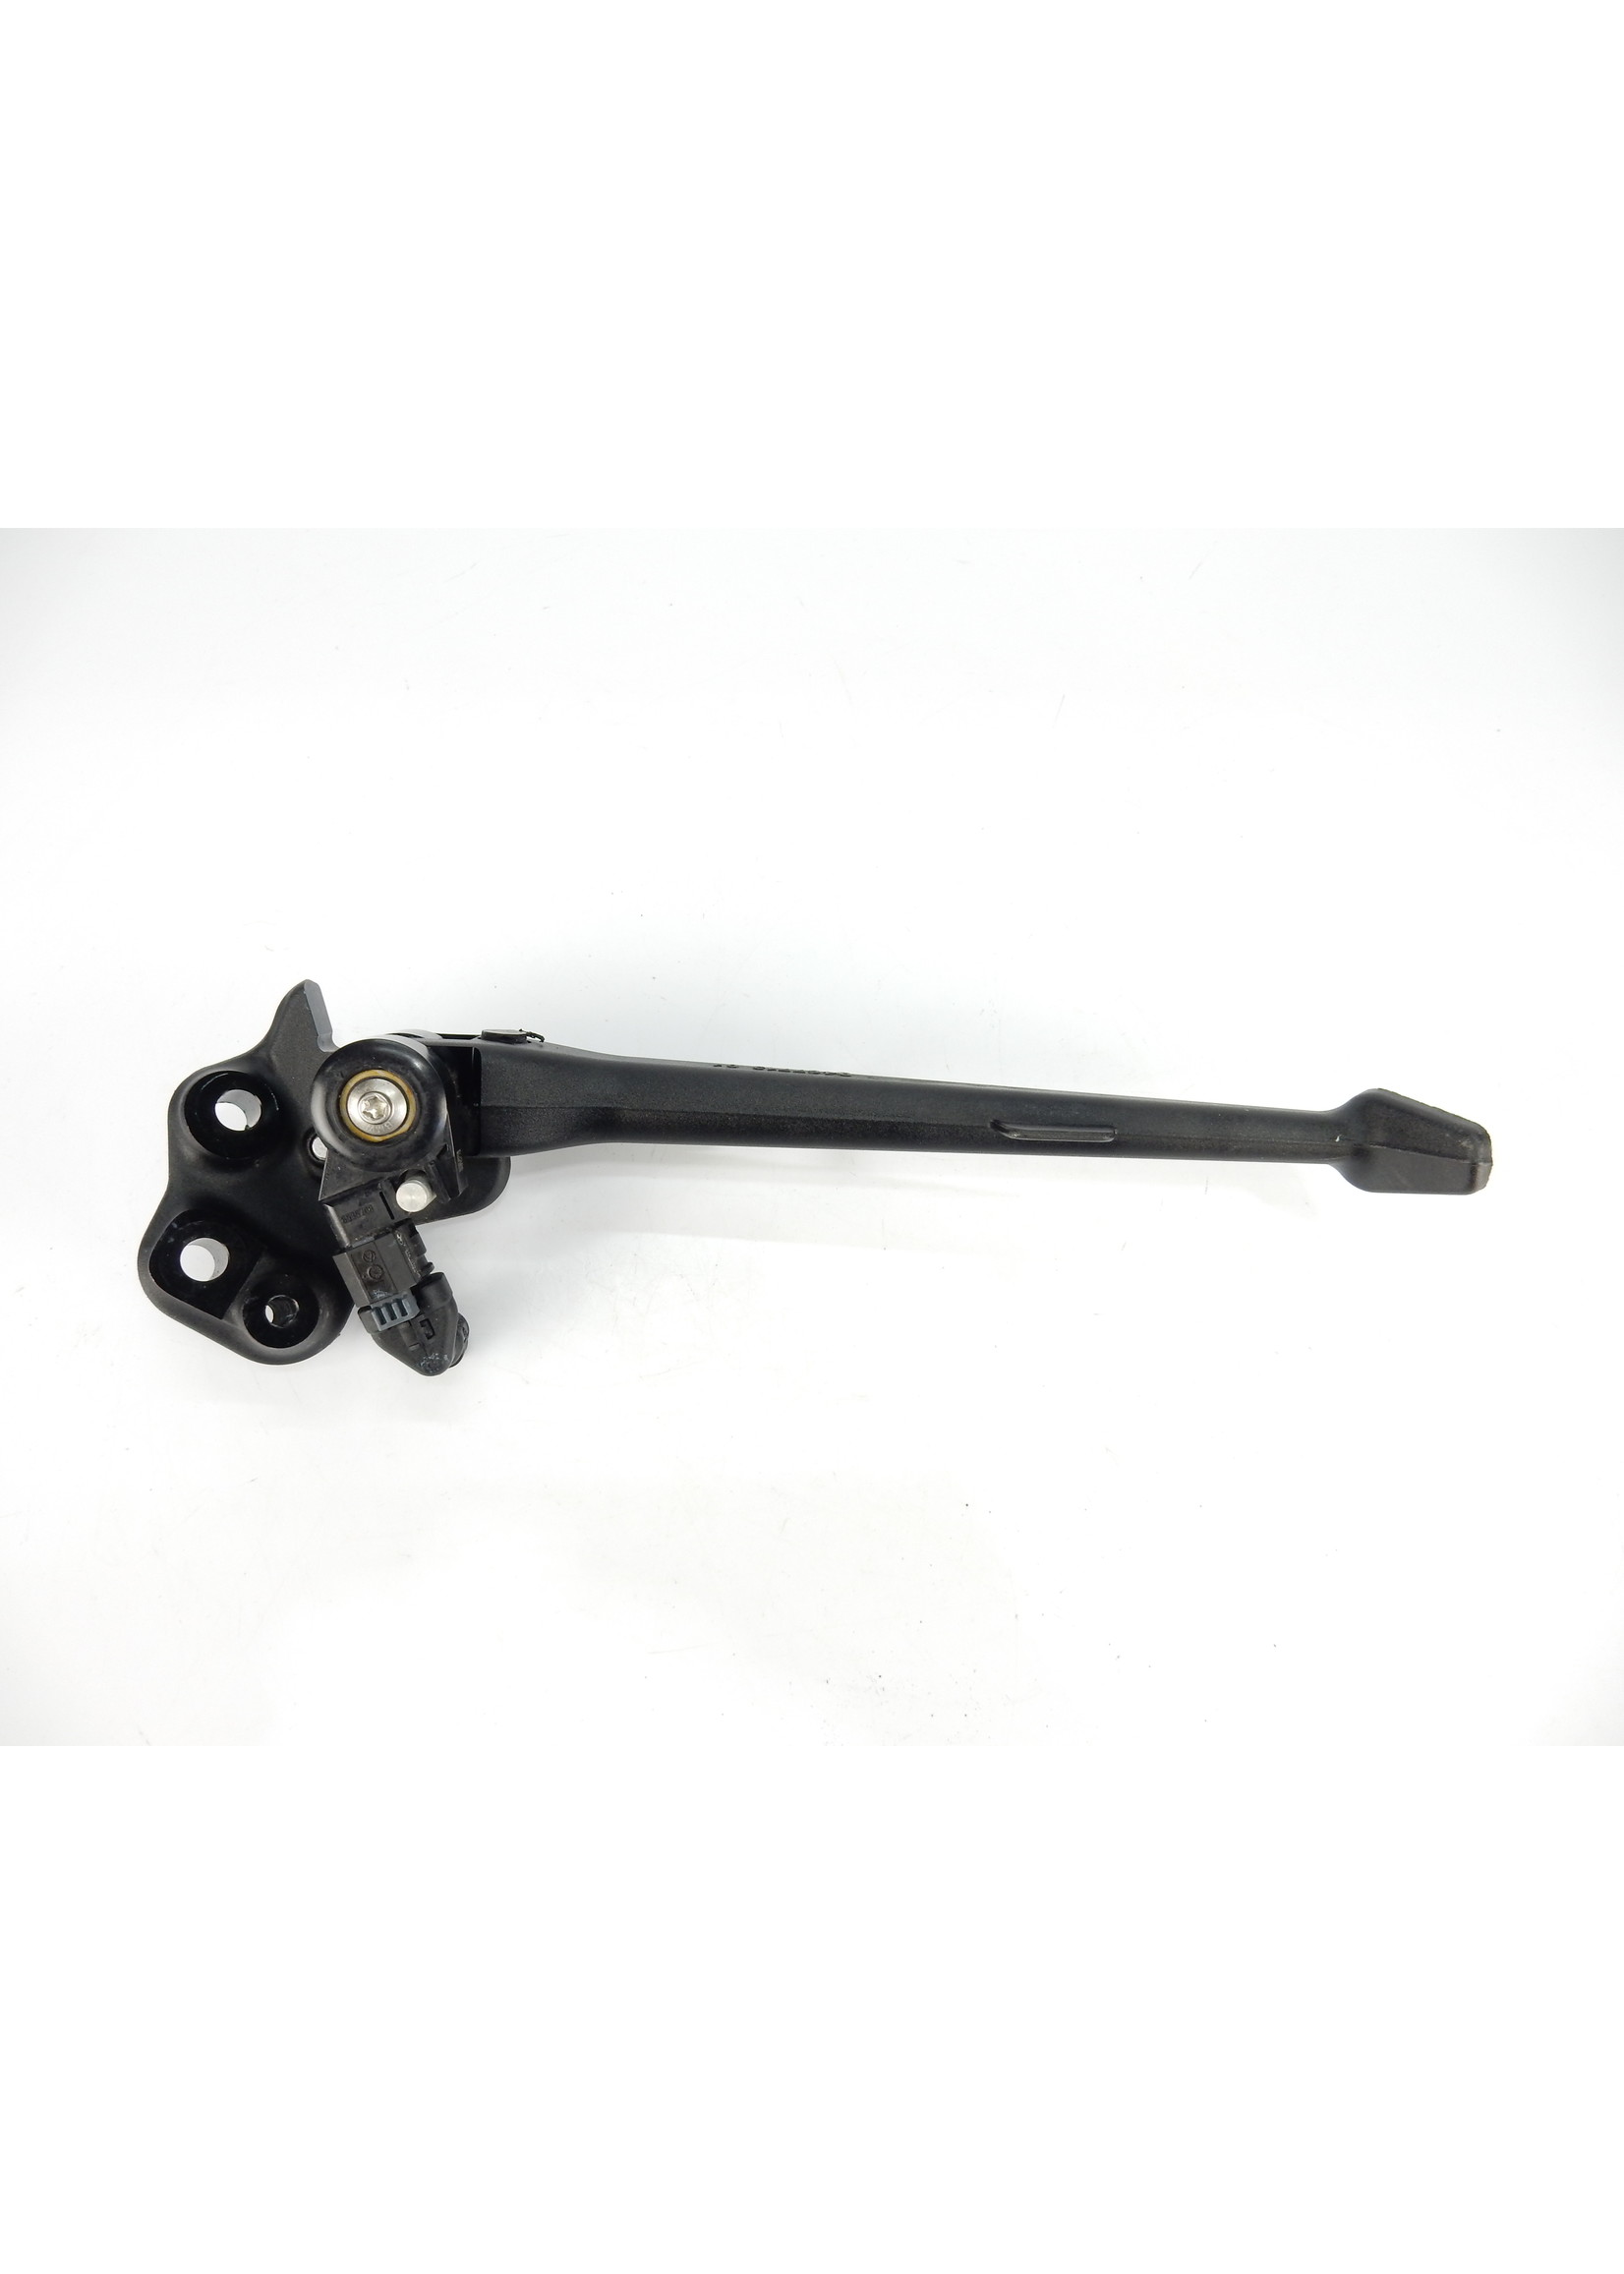 BMW BMW S 1000 R Side stand / Supporting bracket f side stand / Switch, side stand / 46539467713 / 46538373657 / 61318388642